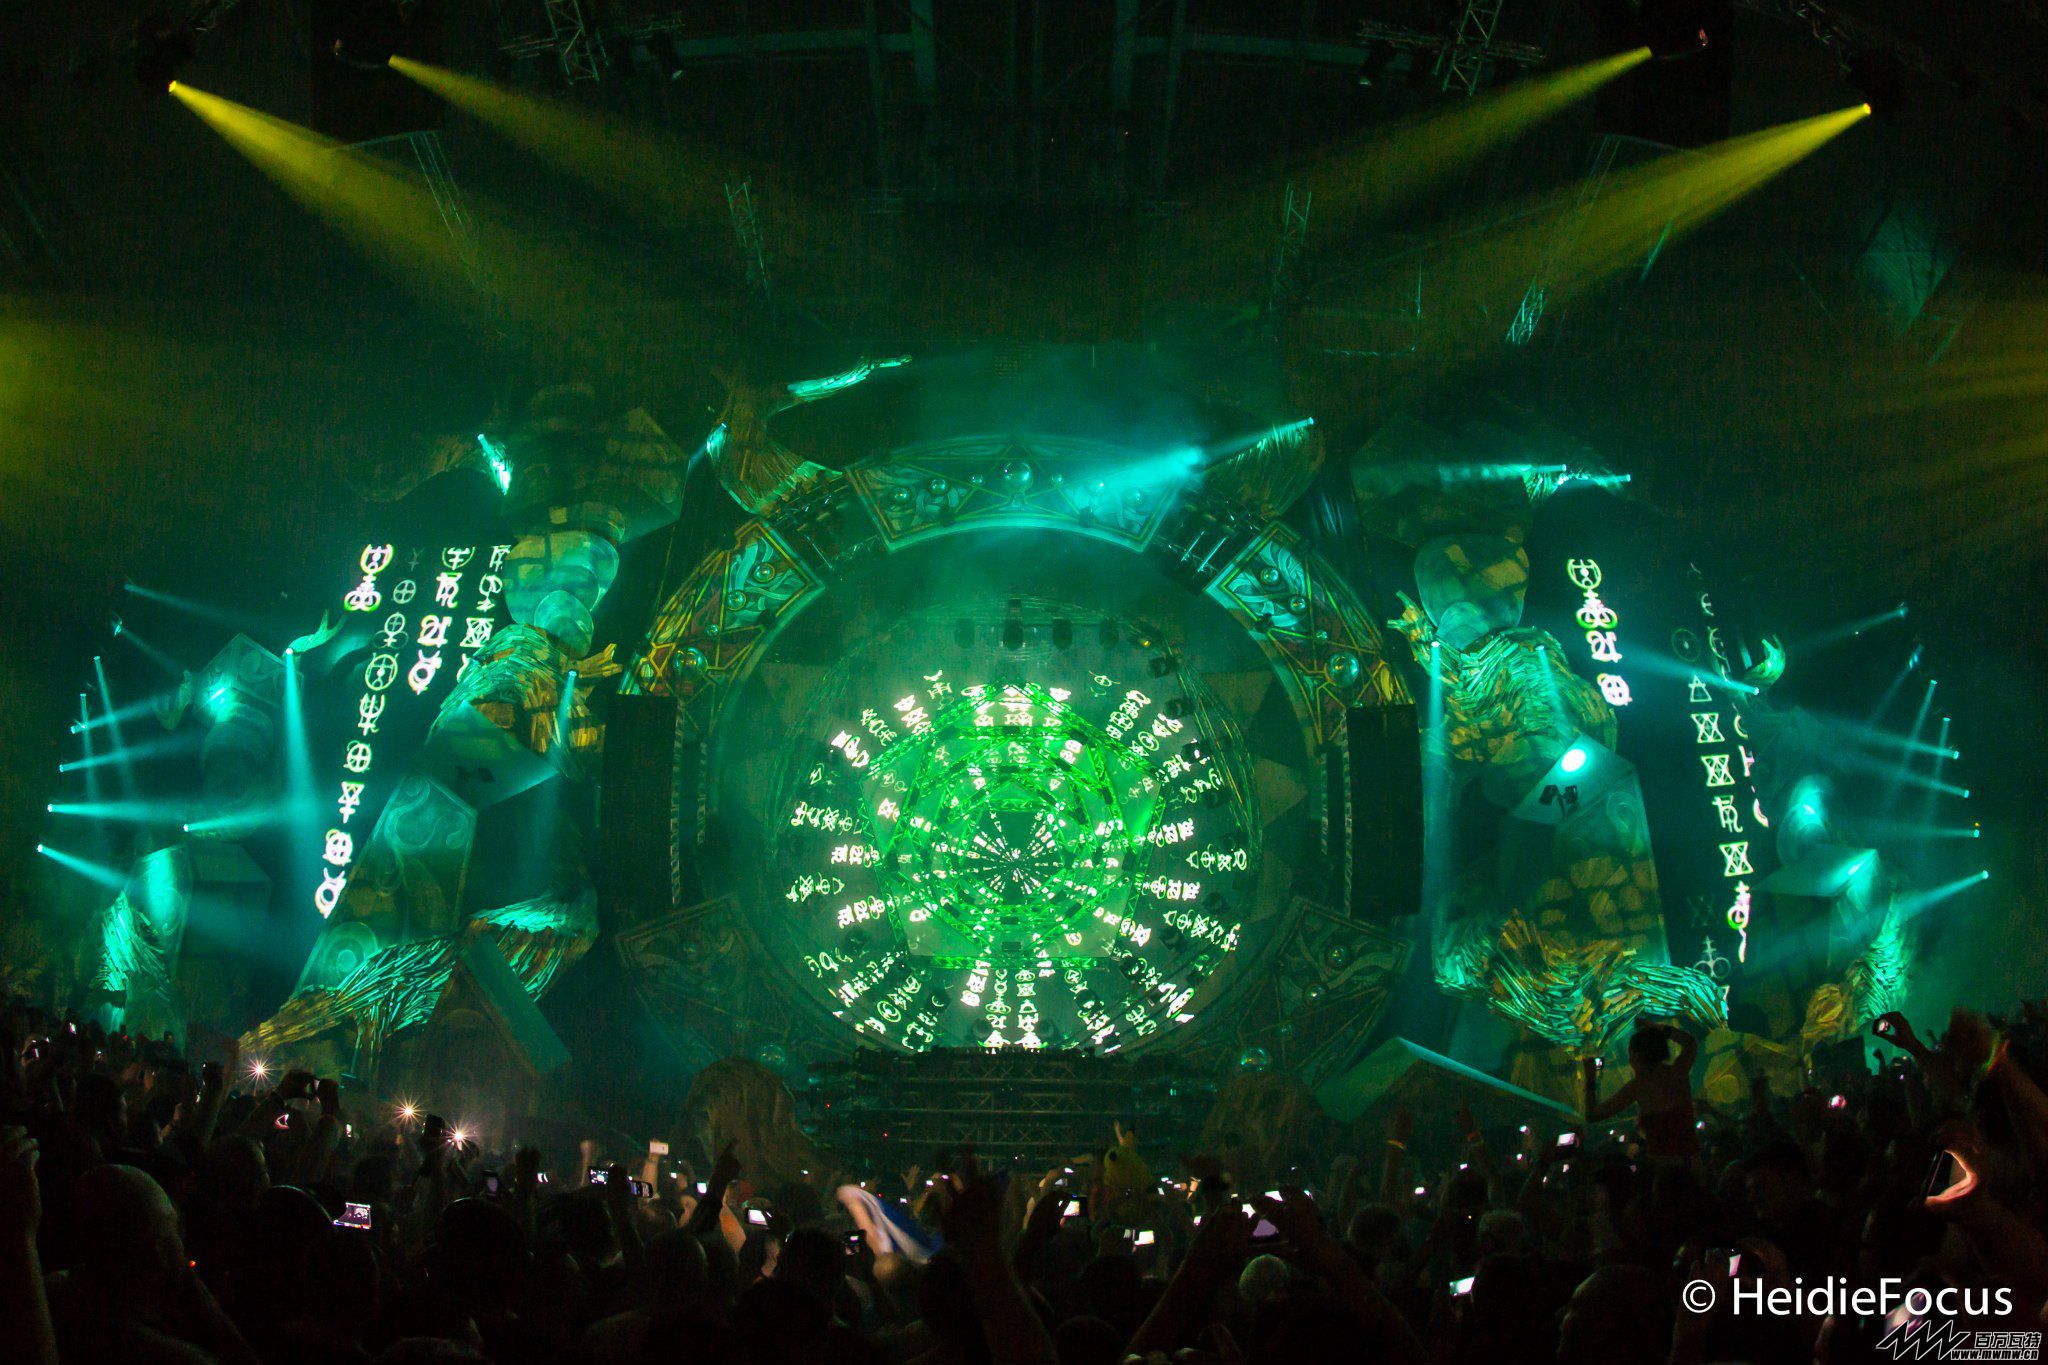 EDM-stage-design-qlimax-fate-or-fortune-1.jpg